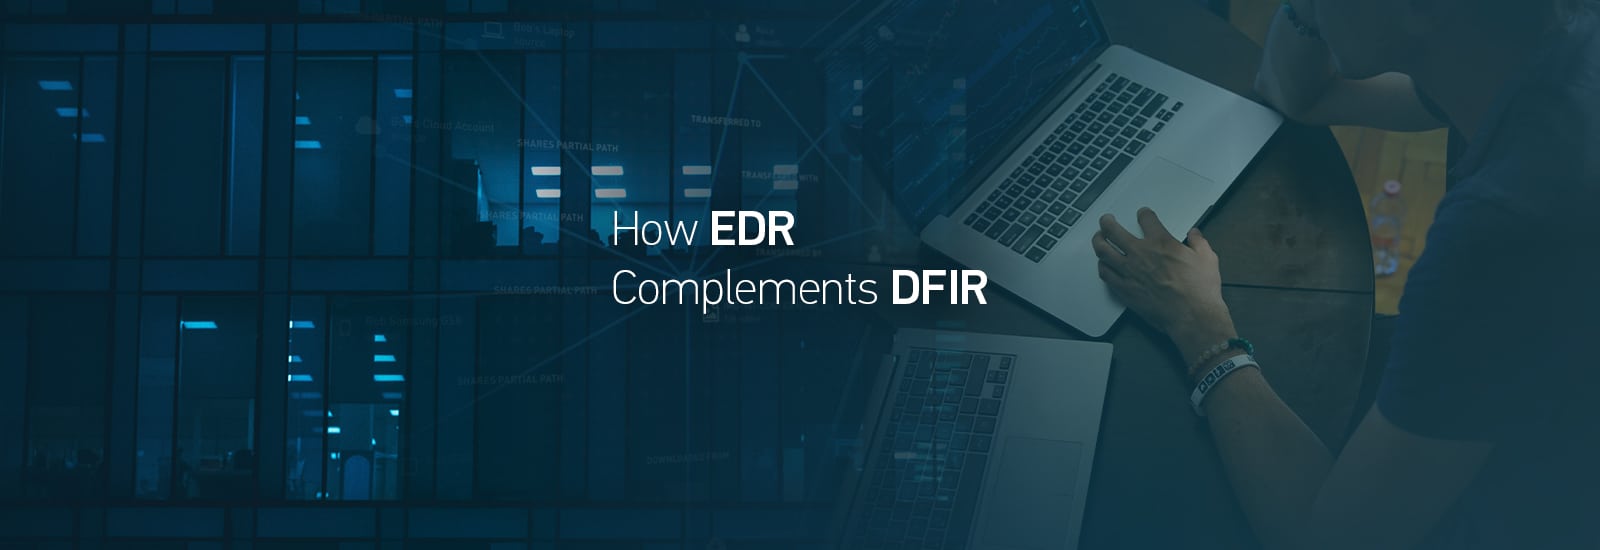 Decorative header for "How EDR Complements DFIR"